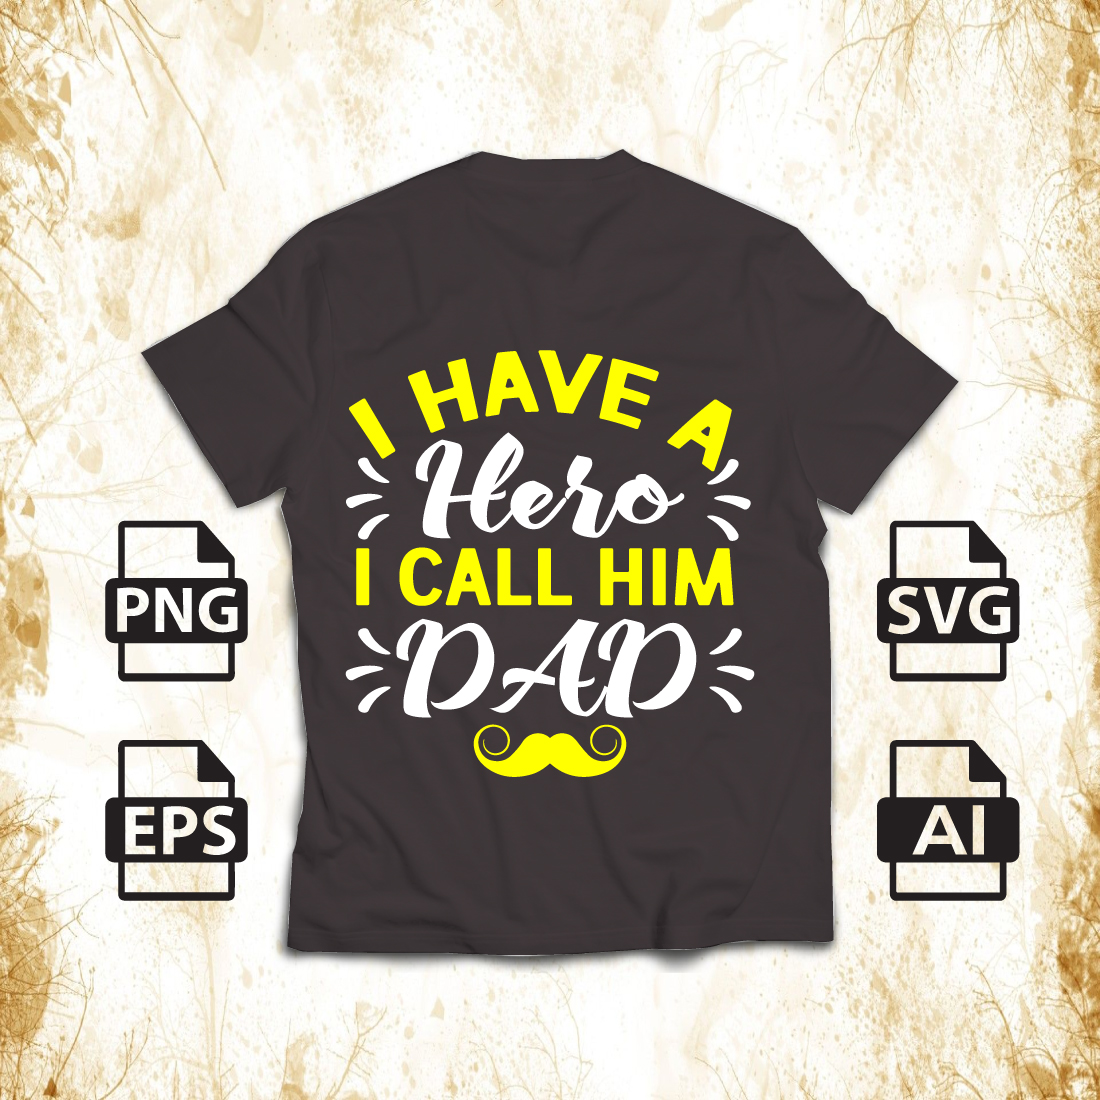 T-Shirt Dad Quote Typography Design facebook image.